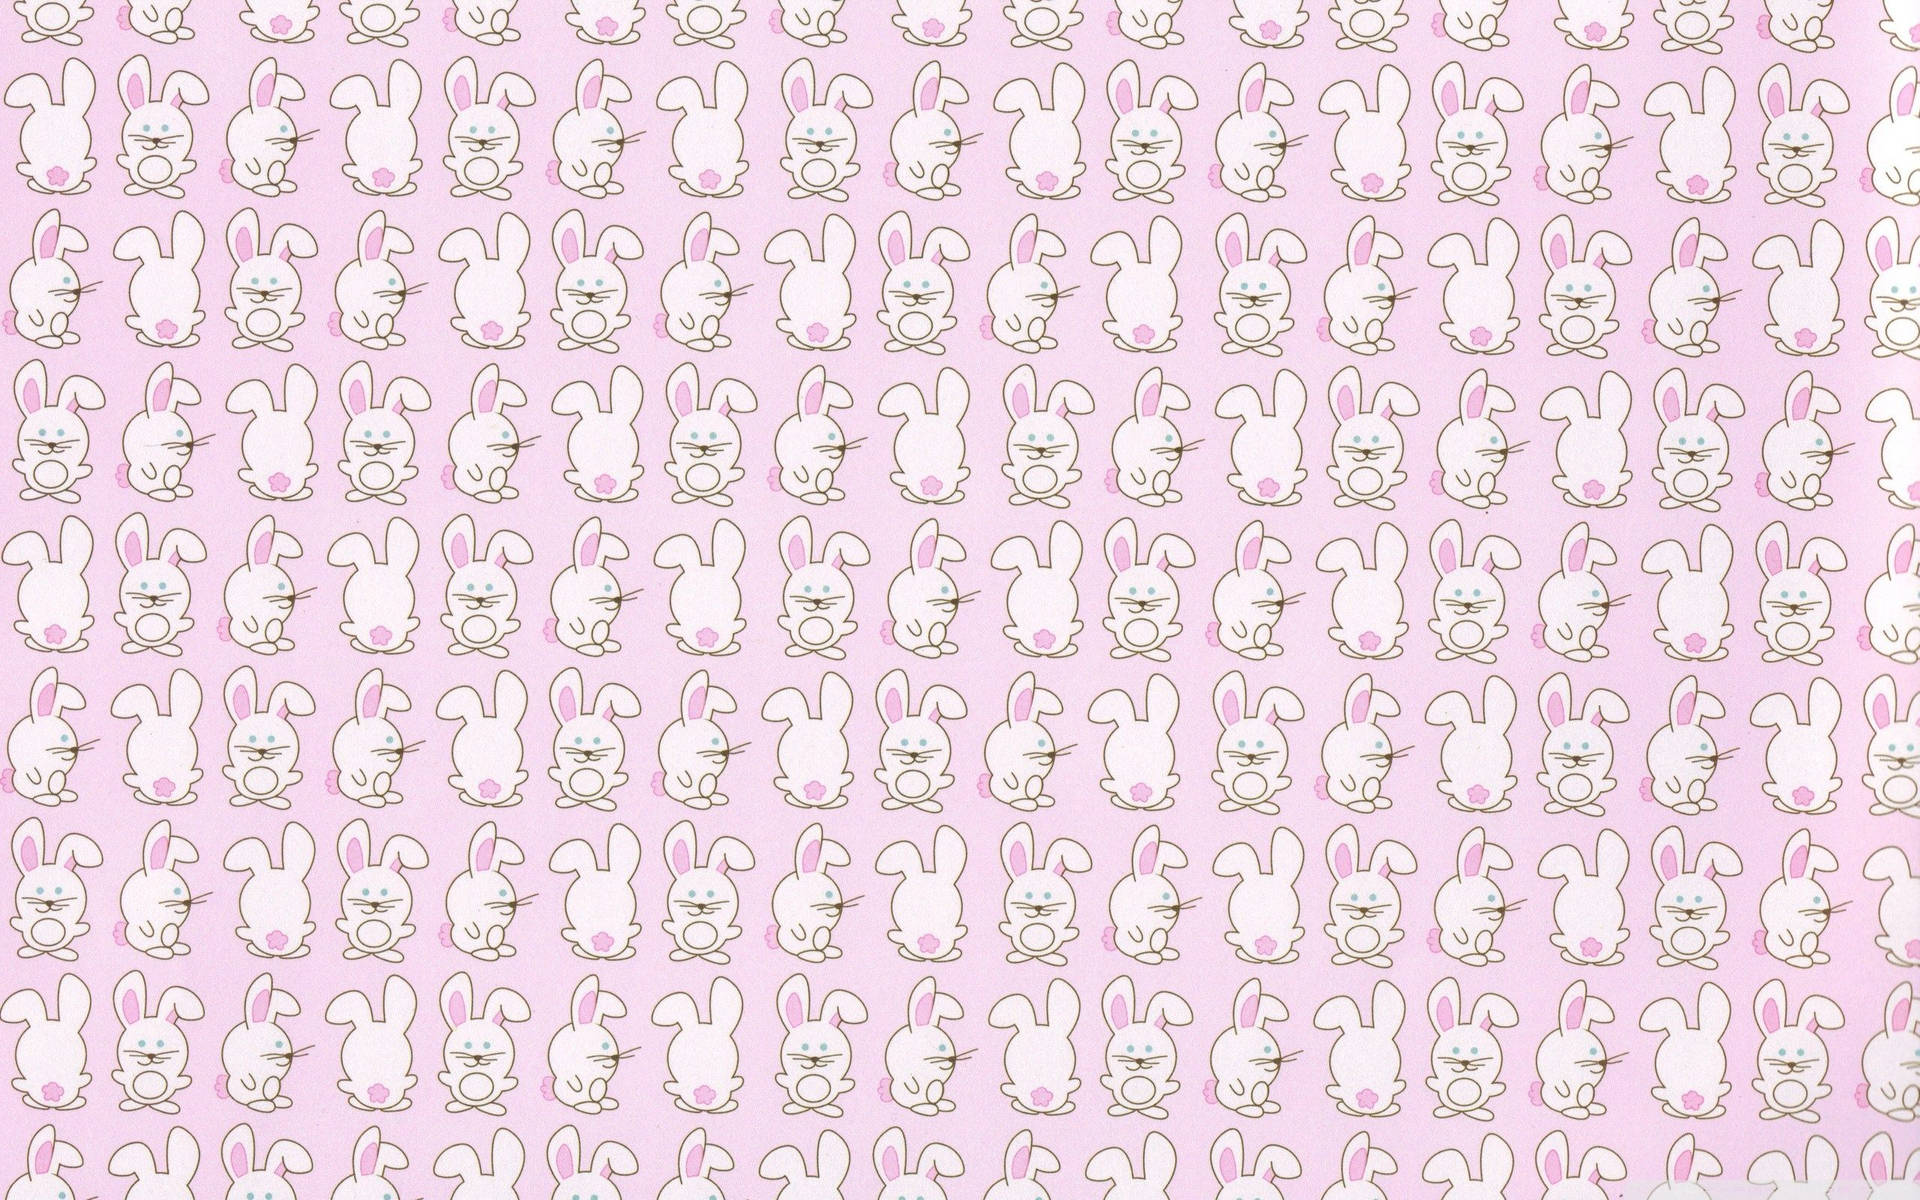 Cute Bunny In Different Perspectives Wallpaper